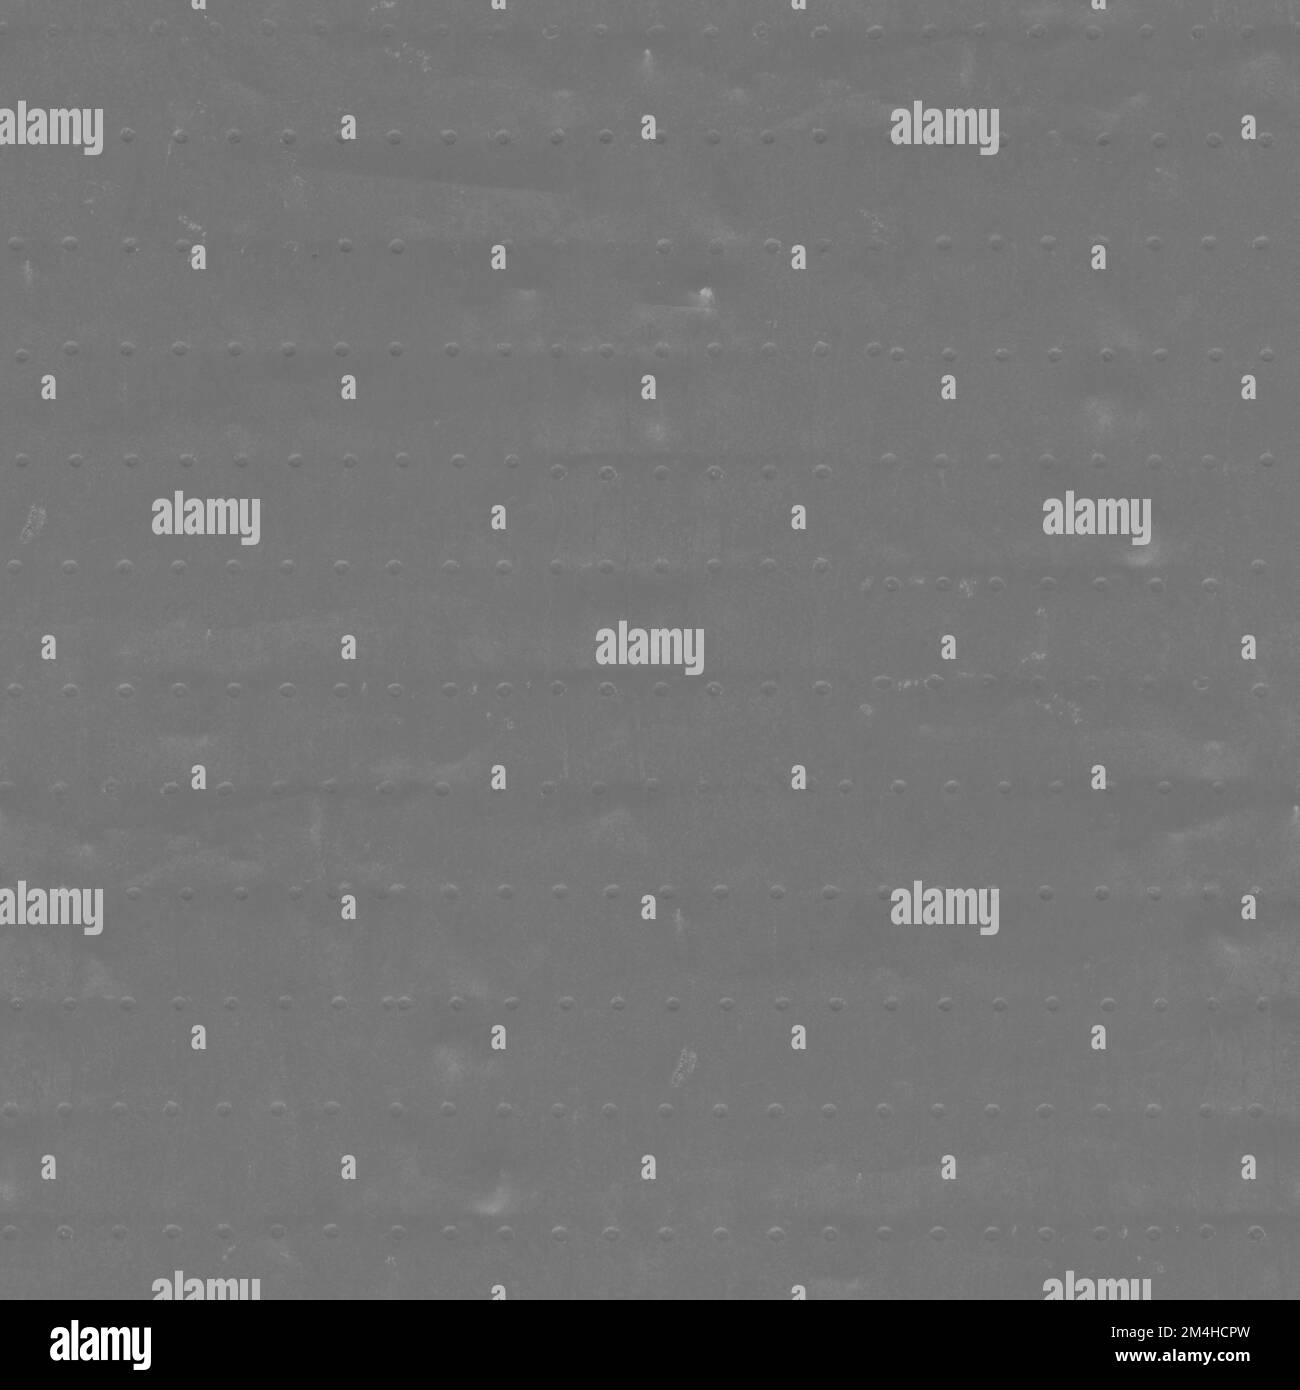 Bump map texture old metal, height texture mapping Stock Photo